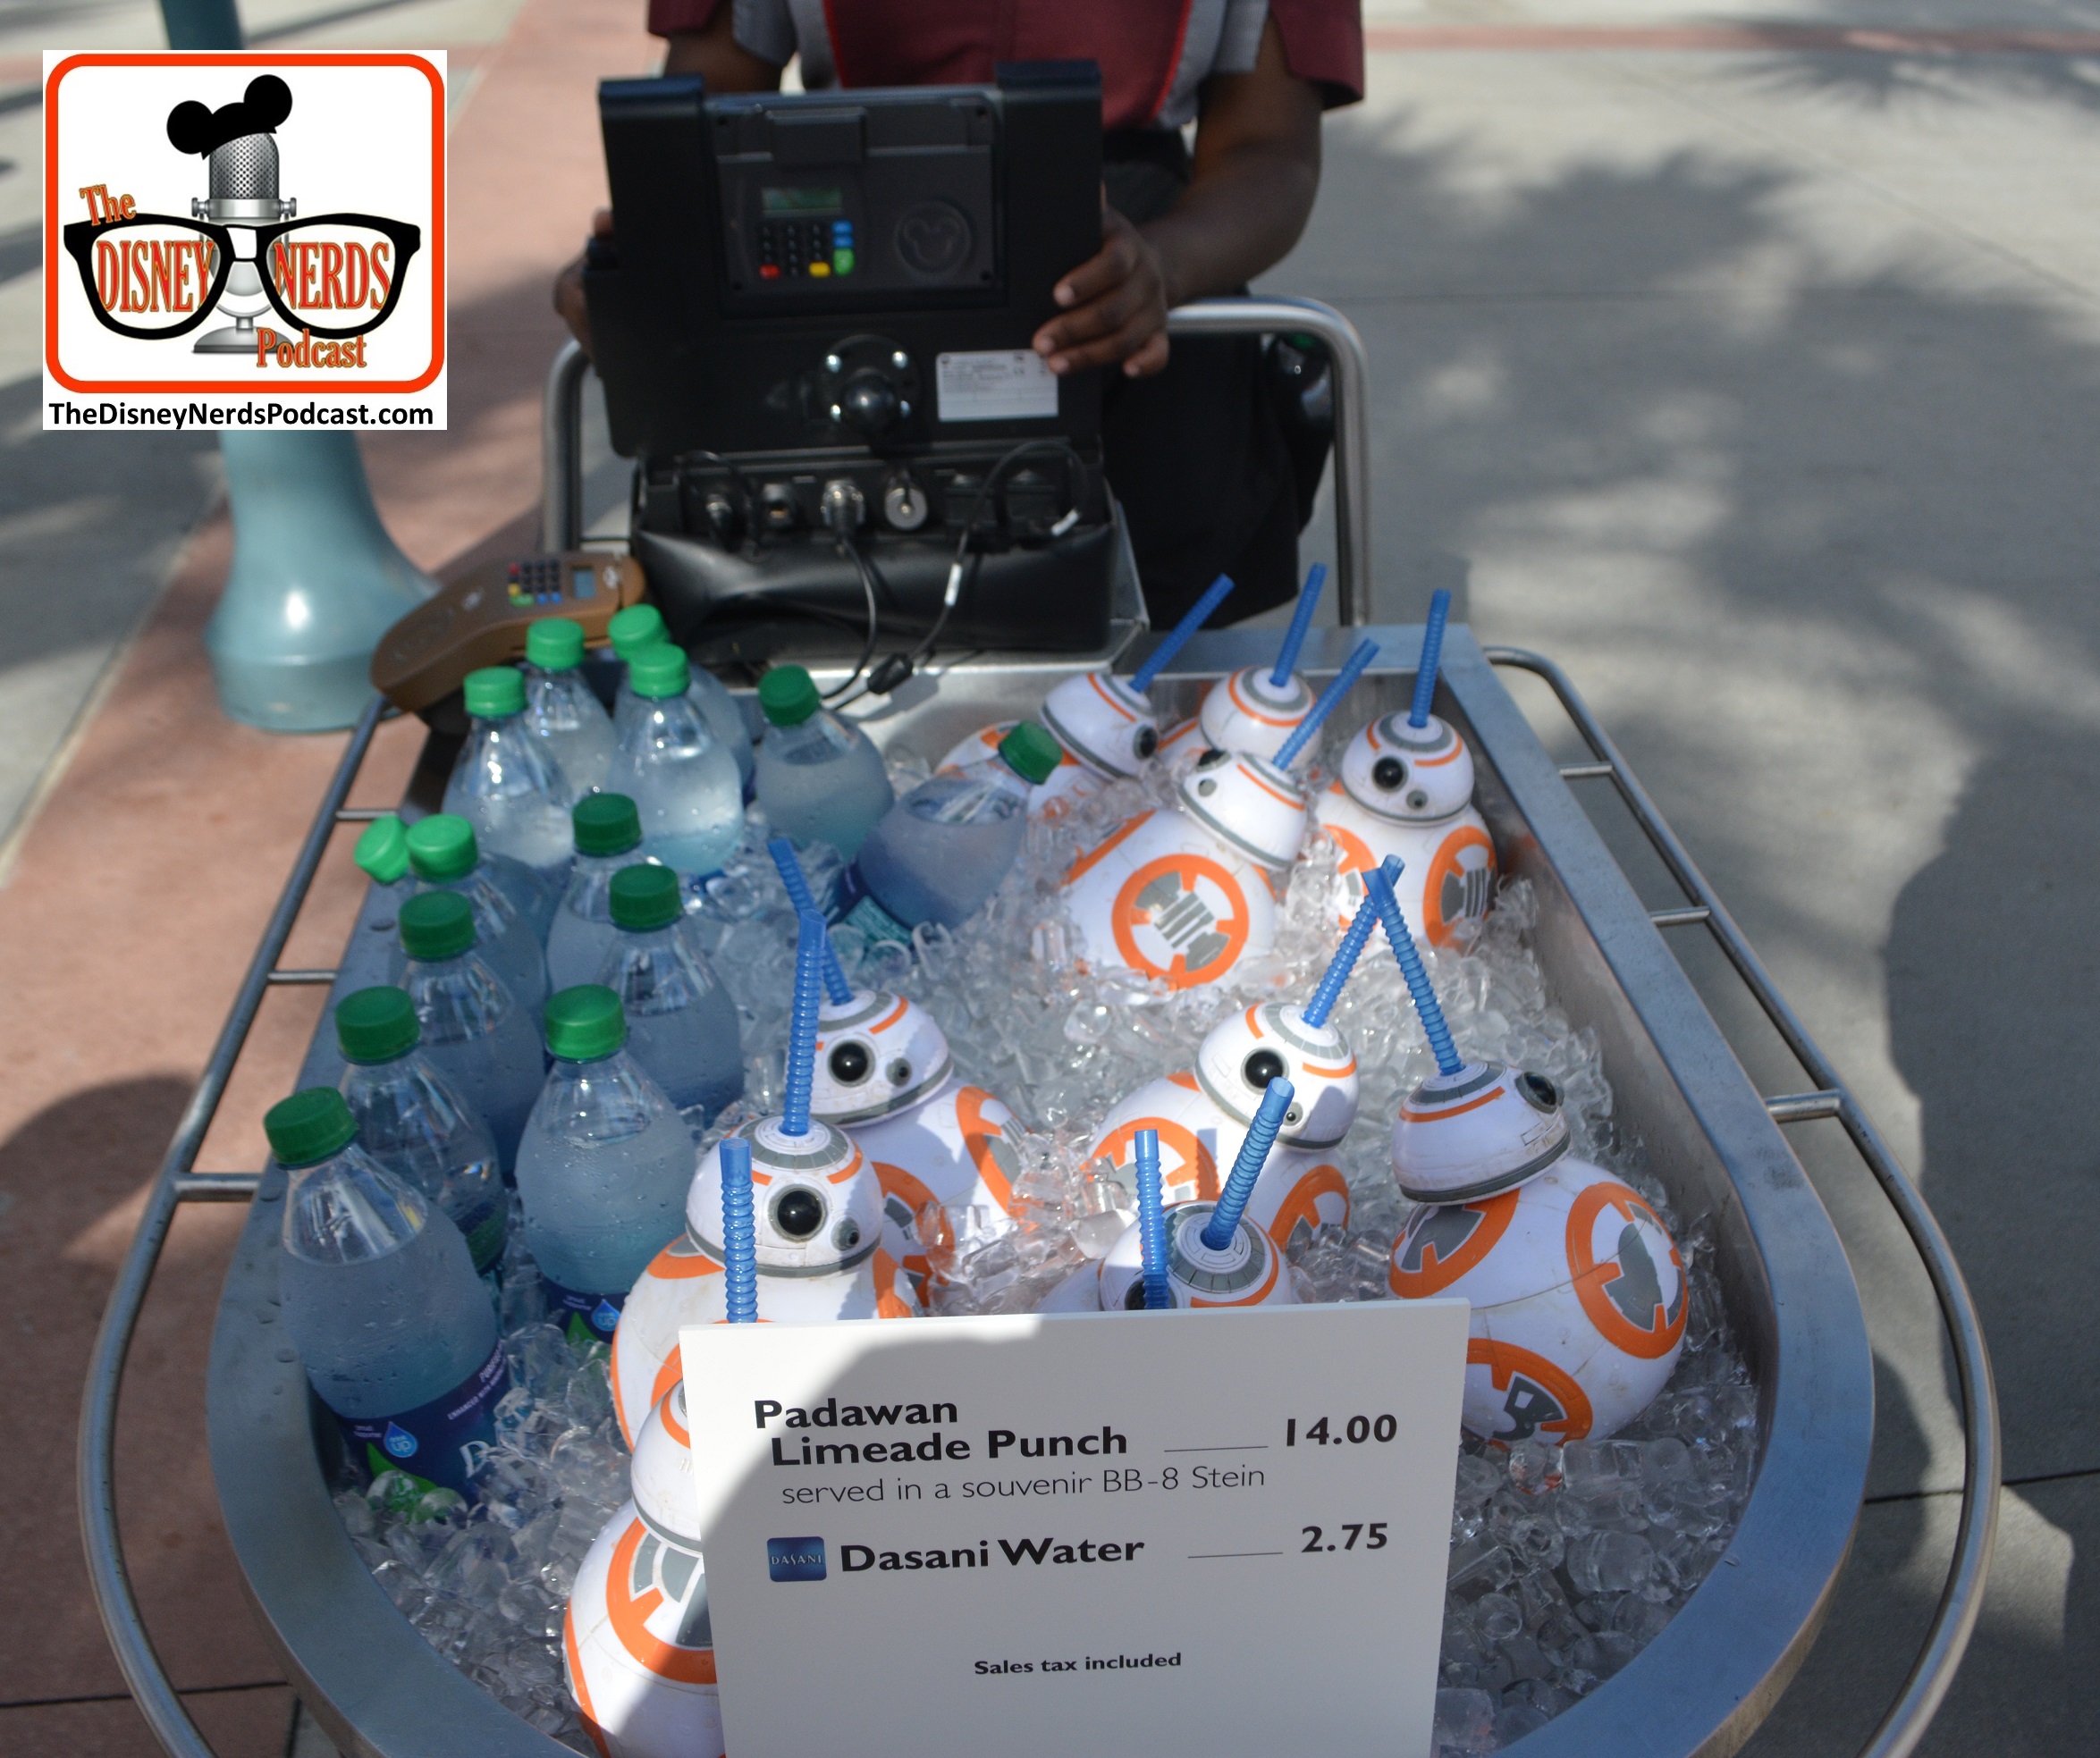 2015-12 - Hollywood Studios - Star Wars Food Offerings outside Launch Bay